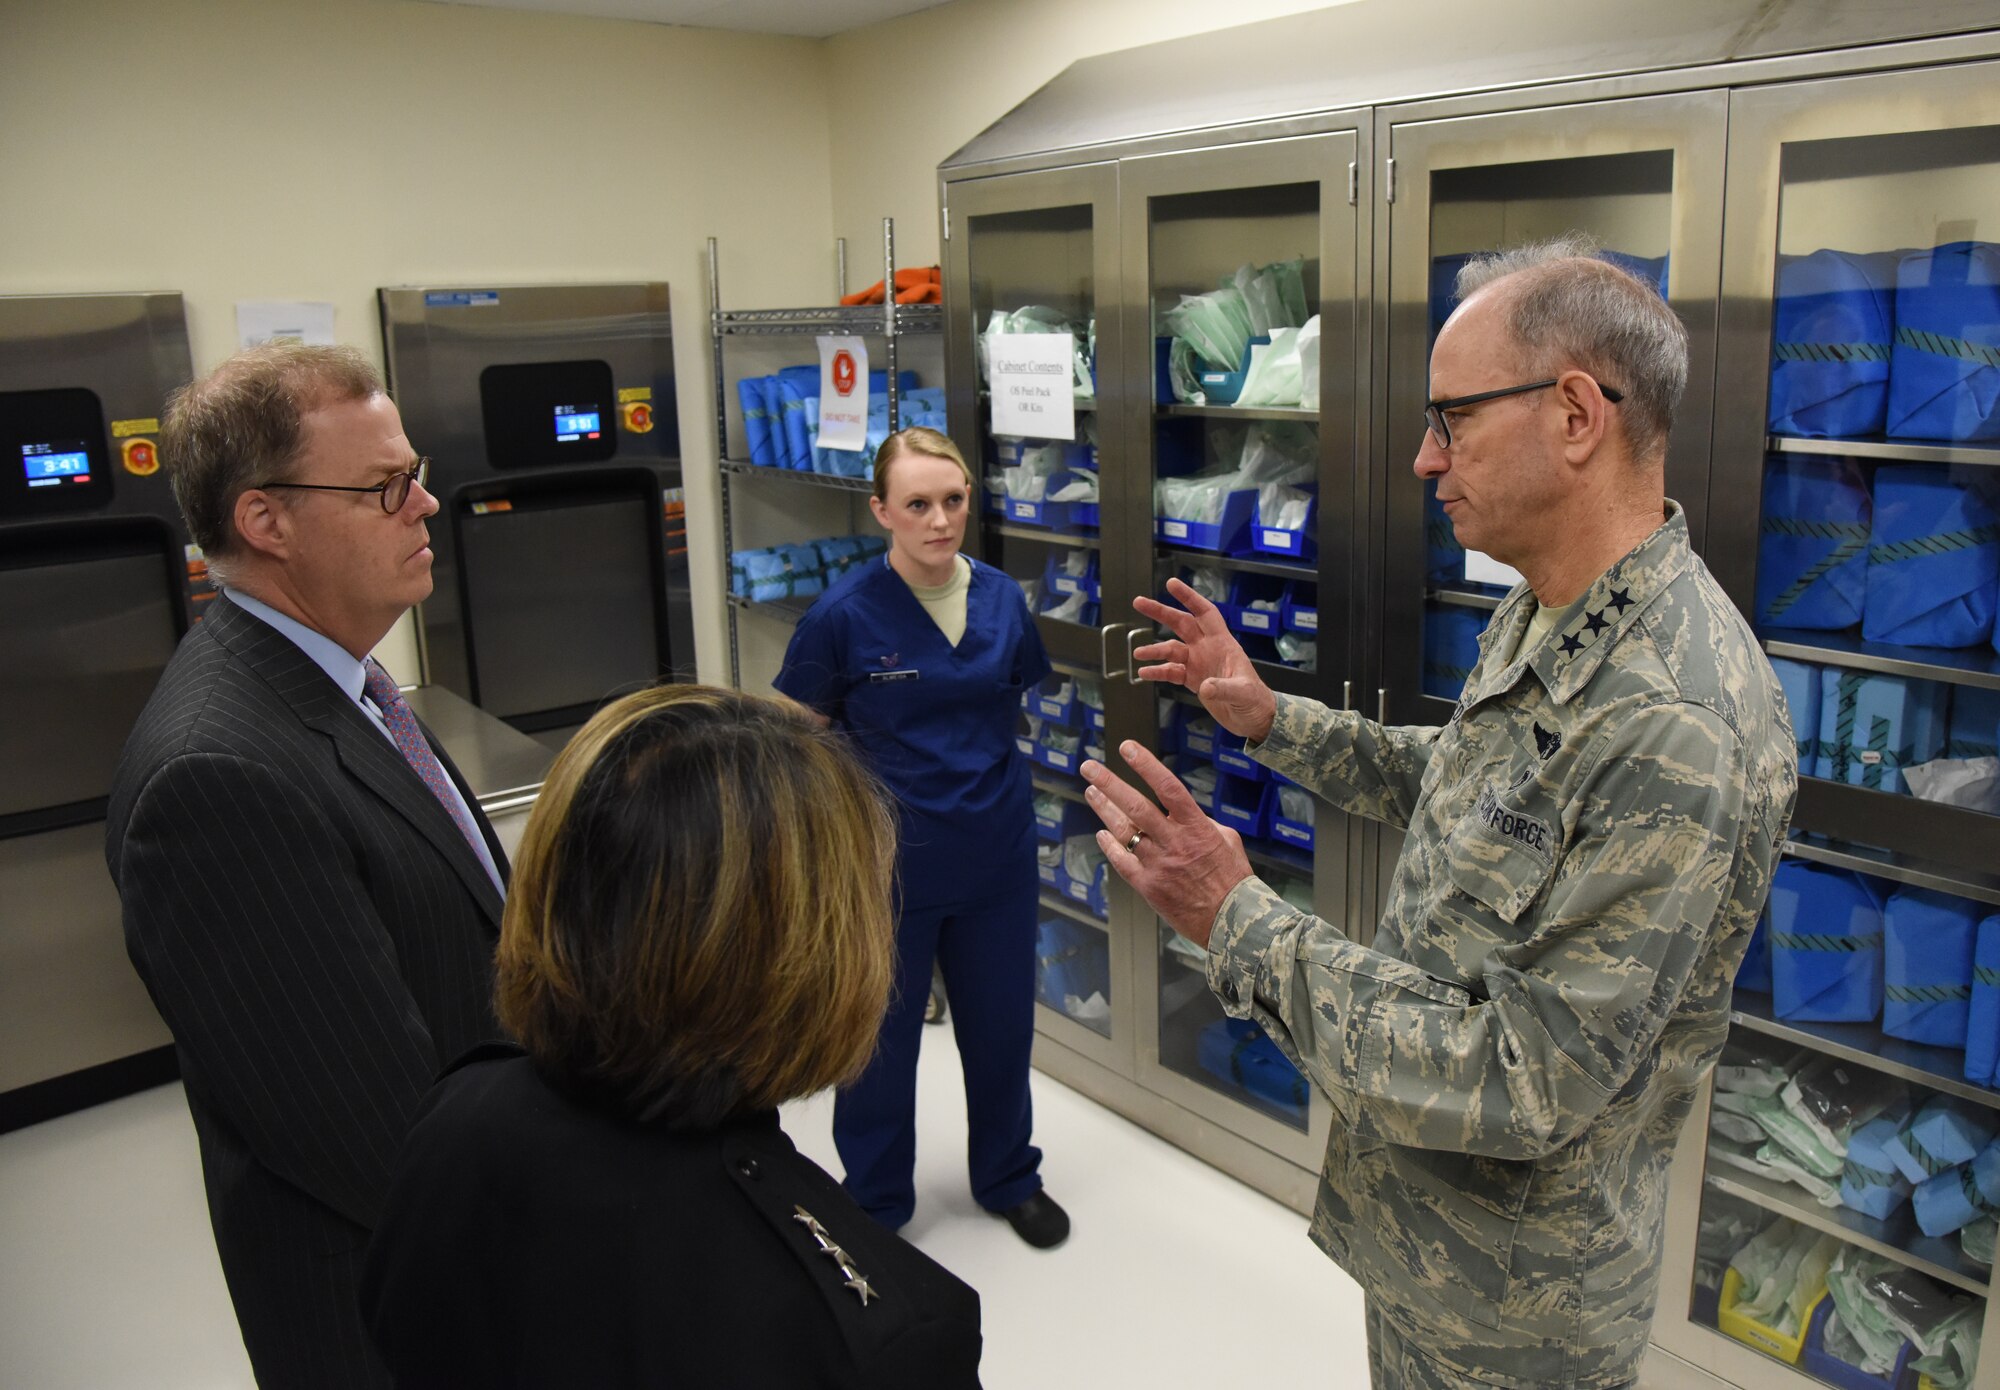 U.S. Air Force Lt. Gen. Mark Ediger, Air Force Surgeon General, right, discusses the 81st Dental Squadron clinic renovations with Thomas McCaffery, Acting Assistant Secretary of Defense for Health Affairs, and U.S. Navy Vice Adm. Raquel Bono, Defense Health Agency director, at the Keesler Medical Center during a site visit at Keesler Air Force Base, Mississippi, April 27, 2018. The purpose of the visit was to get oriented with base operations and the Keesler Medical Center. The visit also included an office call with 2nd AF leadership and tours of the Clinical Research Lab and Radiology Oncology. (U.S. Air Force photo by Kemberly Groue)